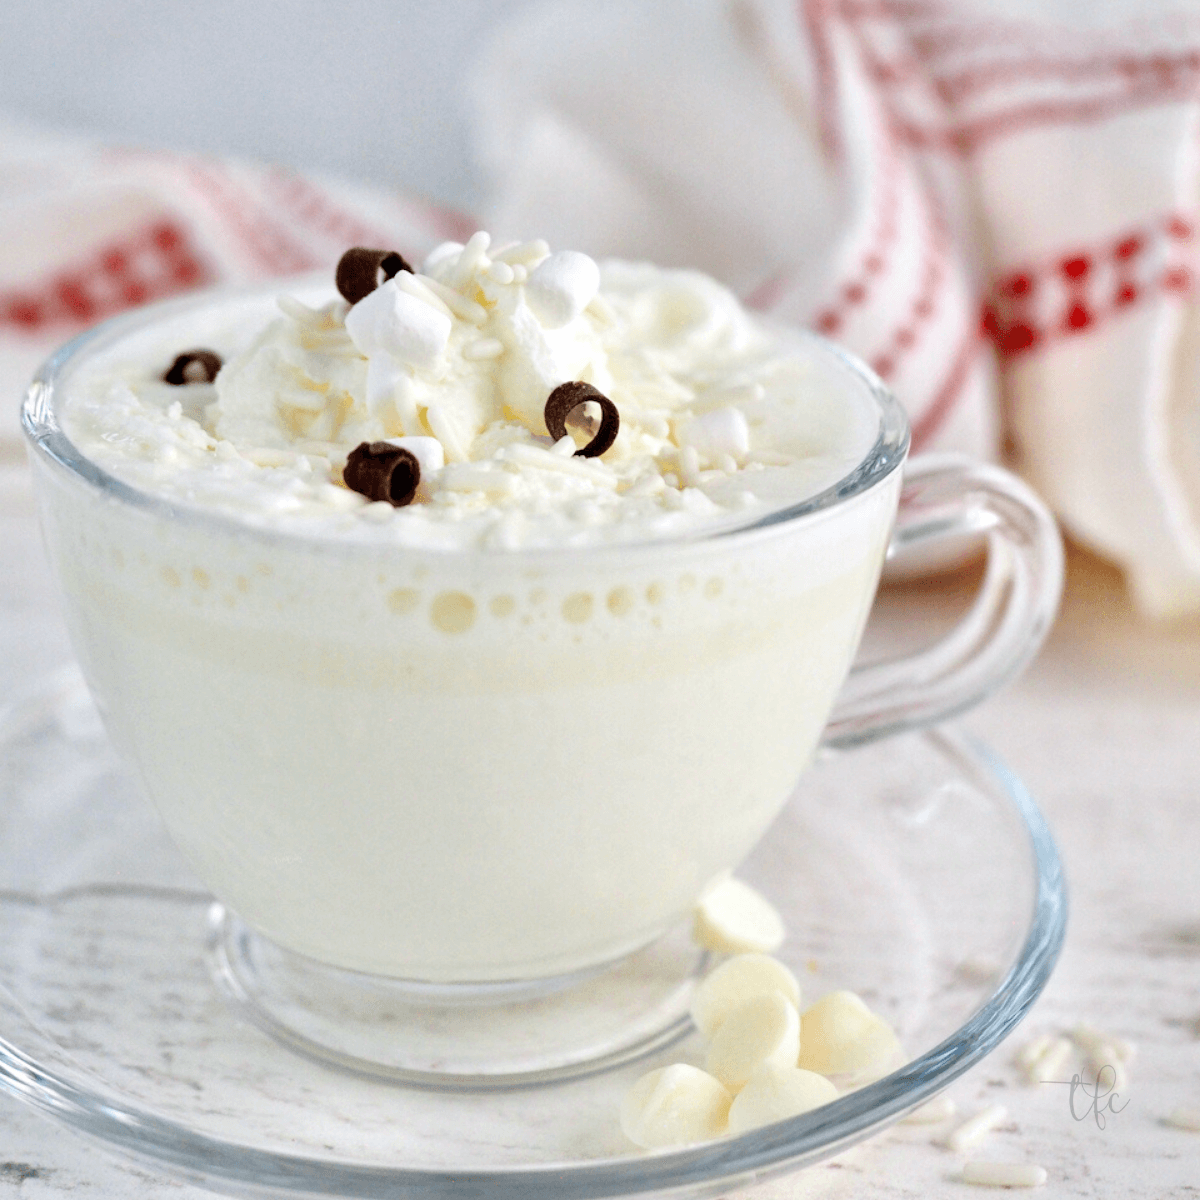 https://www.thefreshcooky.com/wp-content/uploads/2022/01/Starbucks-White-Hot-Chocolate-Square.png